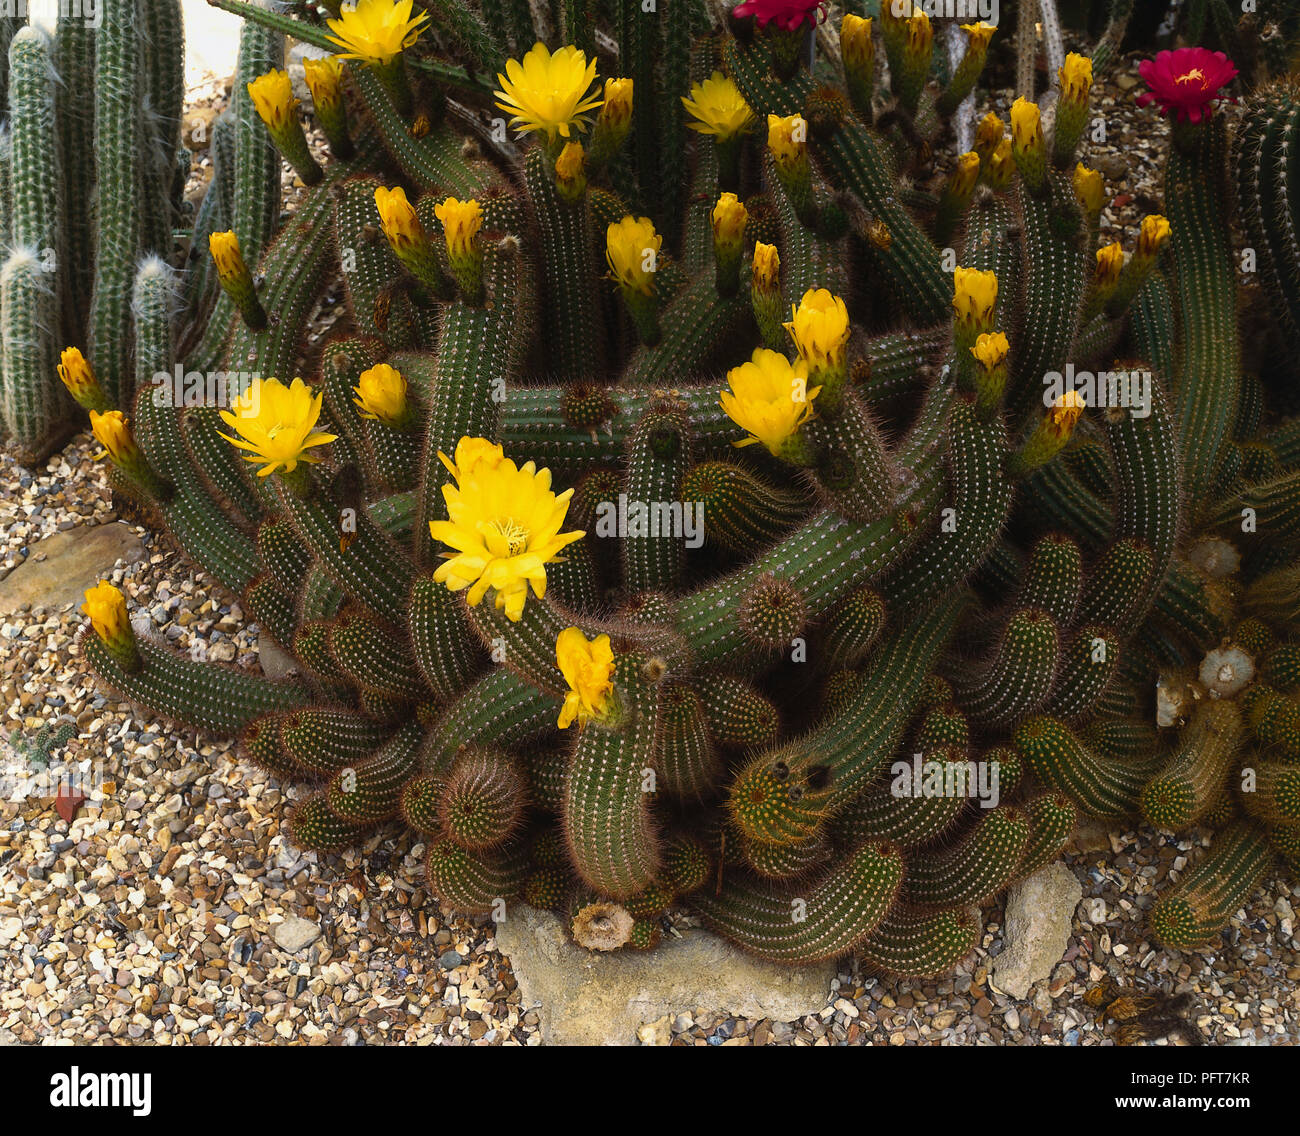 Echinopsis huascha, thick round stems covered in coloured spines. Golden funnel shaped blooms. Stock Photo